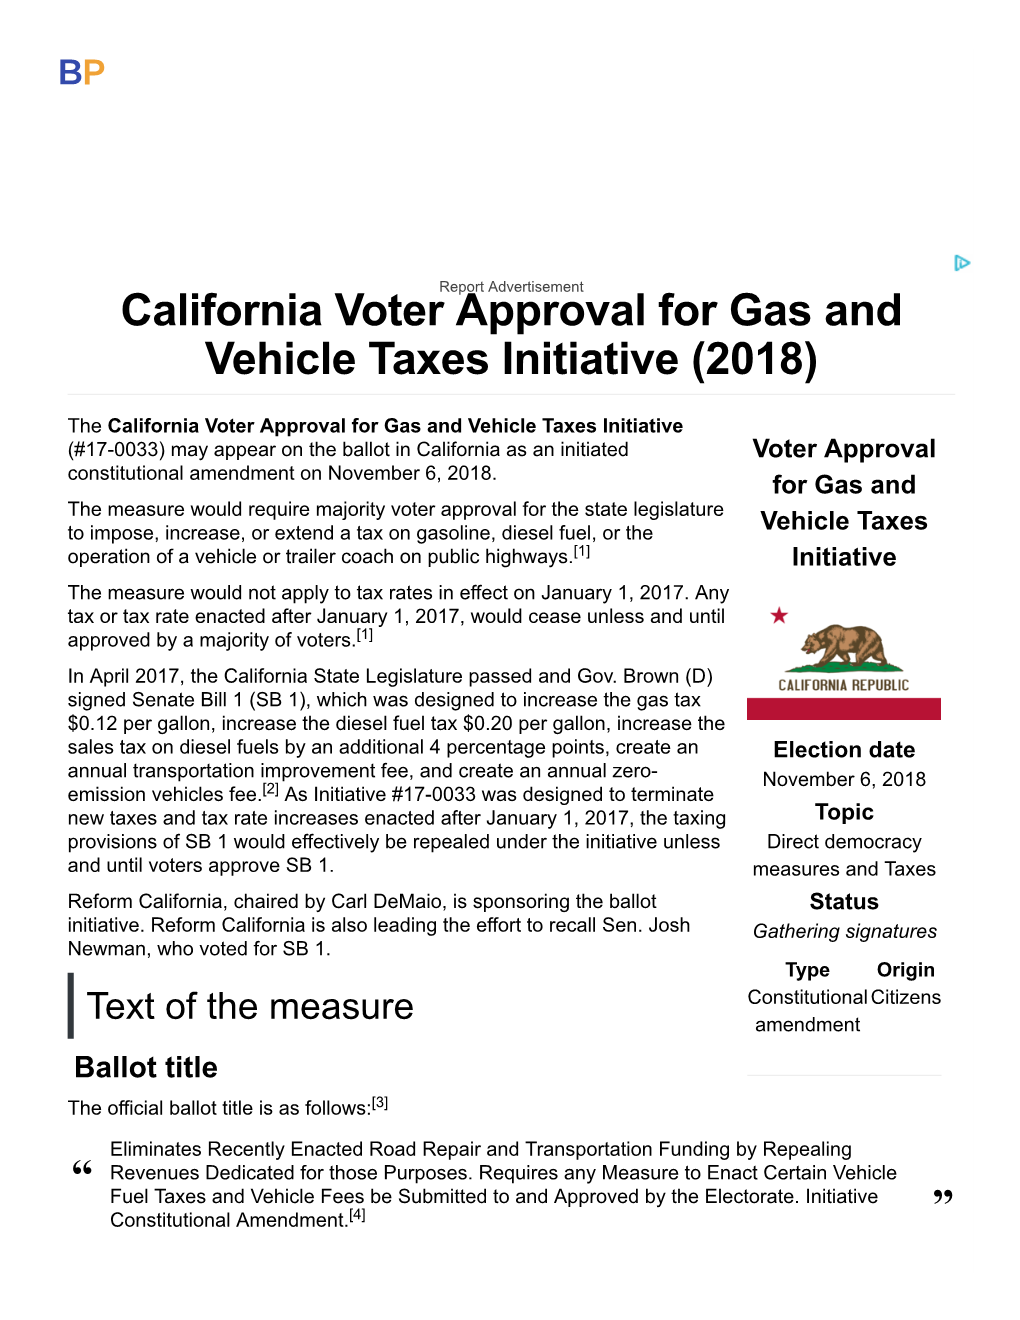 California Voter Approval for Gas and Vehicle Taxes Initiative (2018)